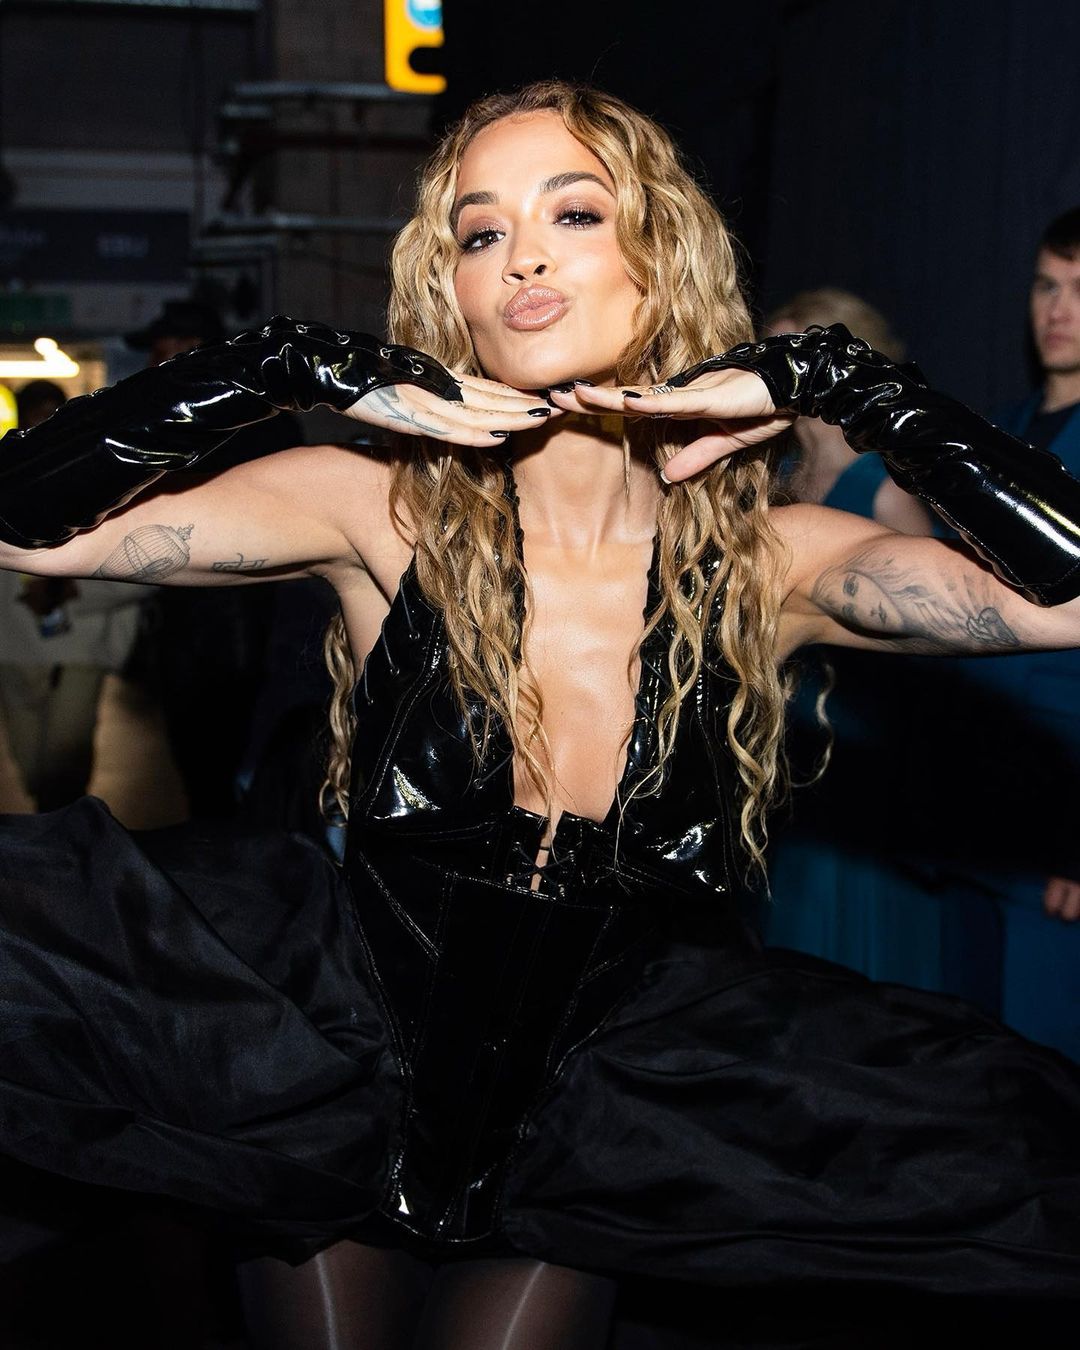 Rita Ora Wants You to Come Workout With Her! - Photo 20